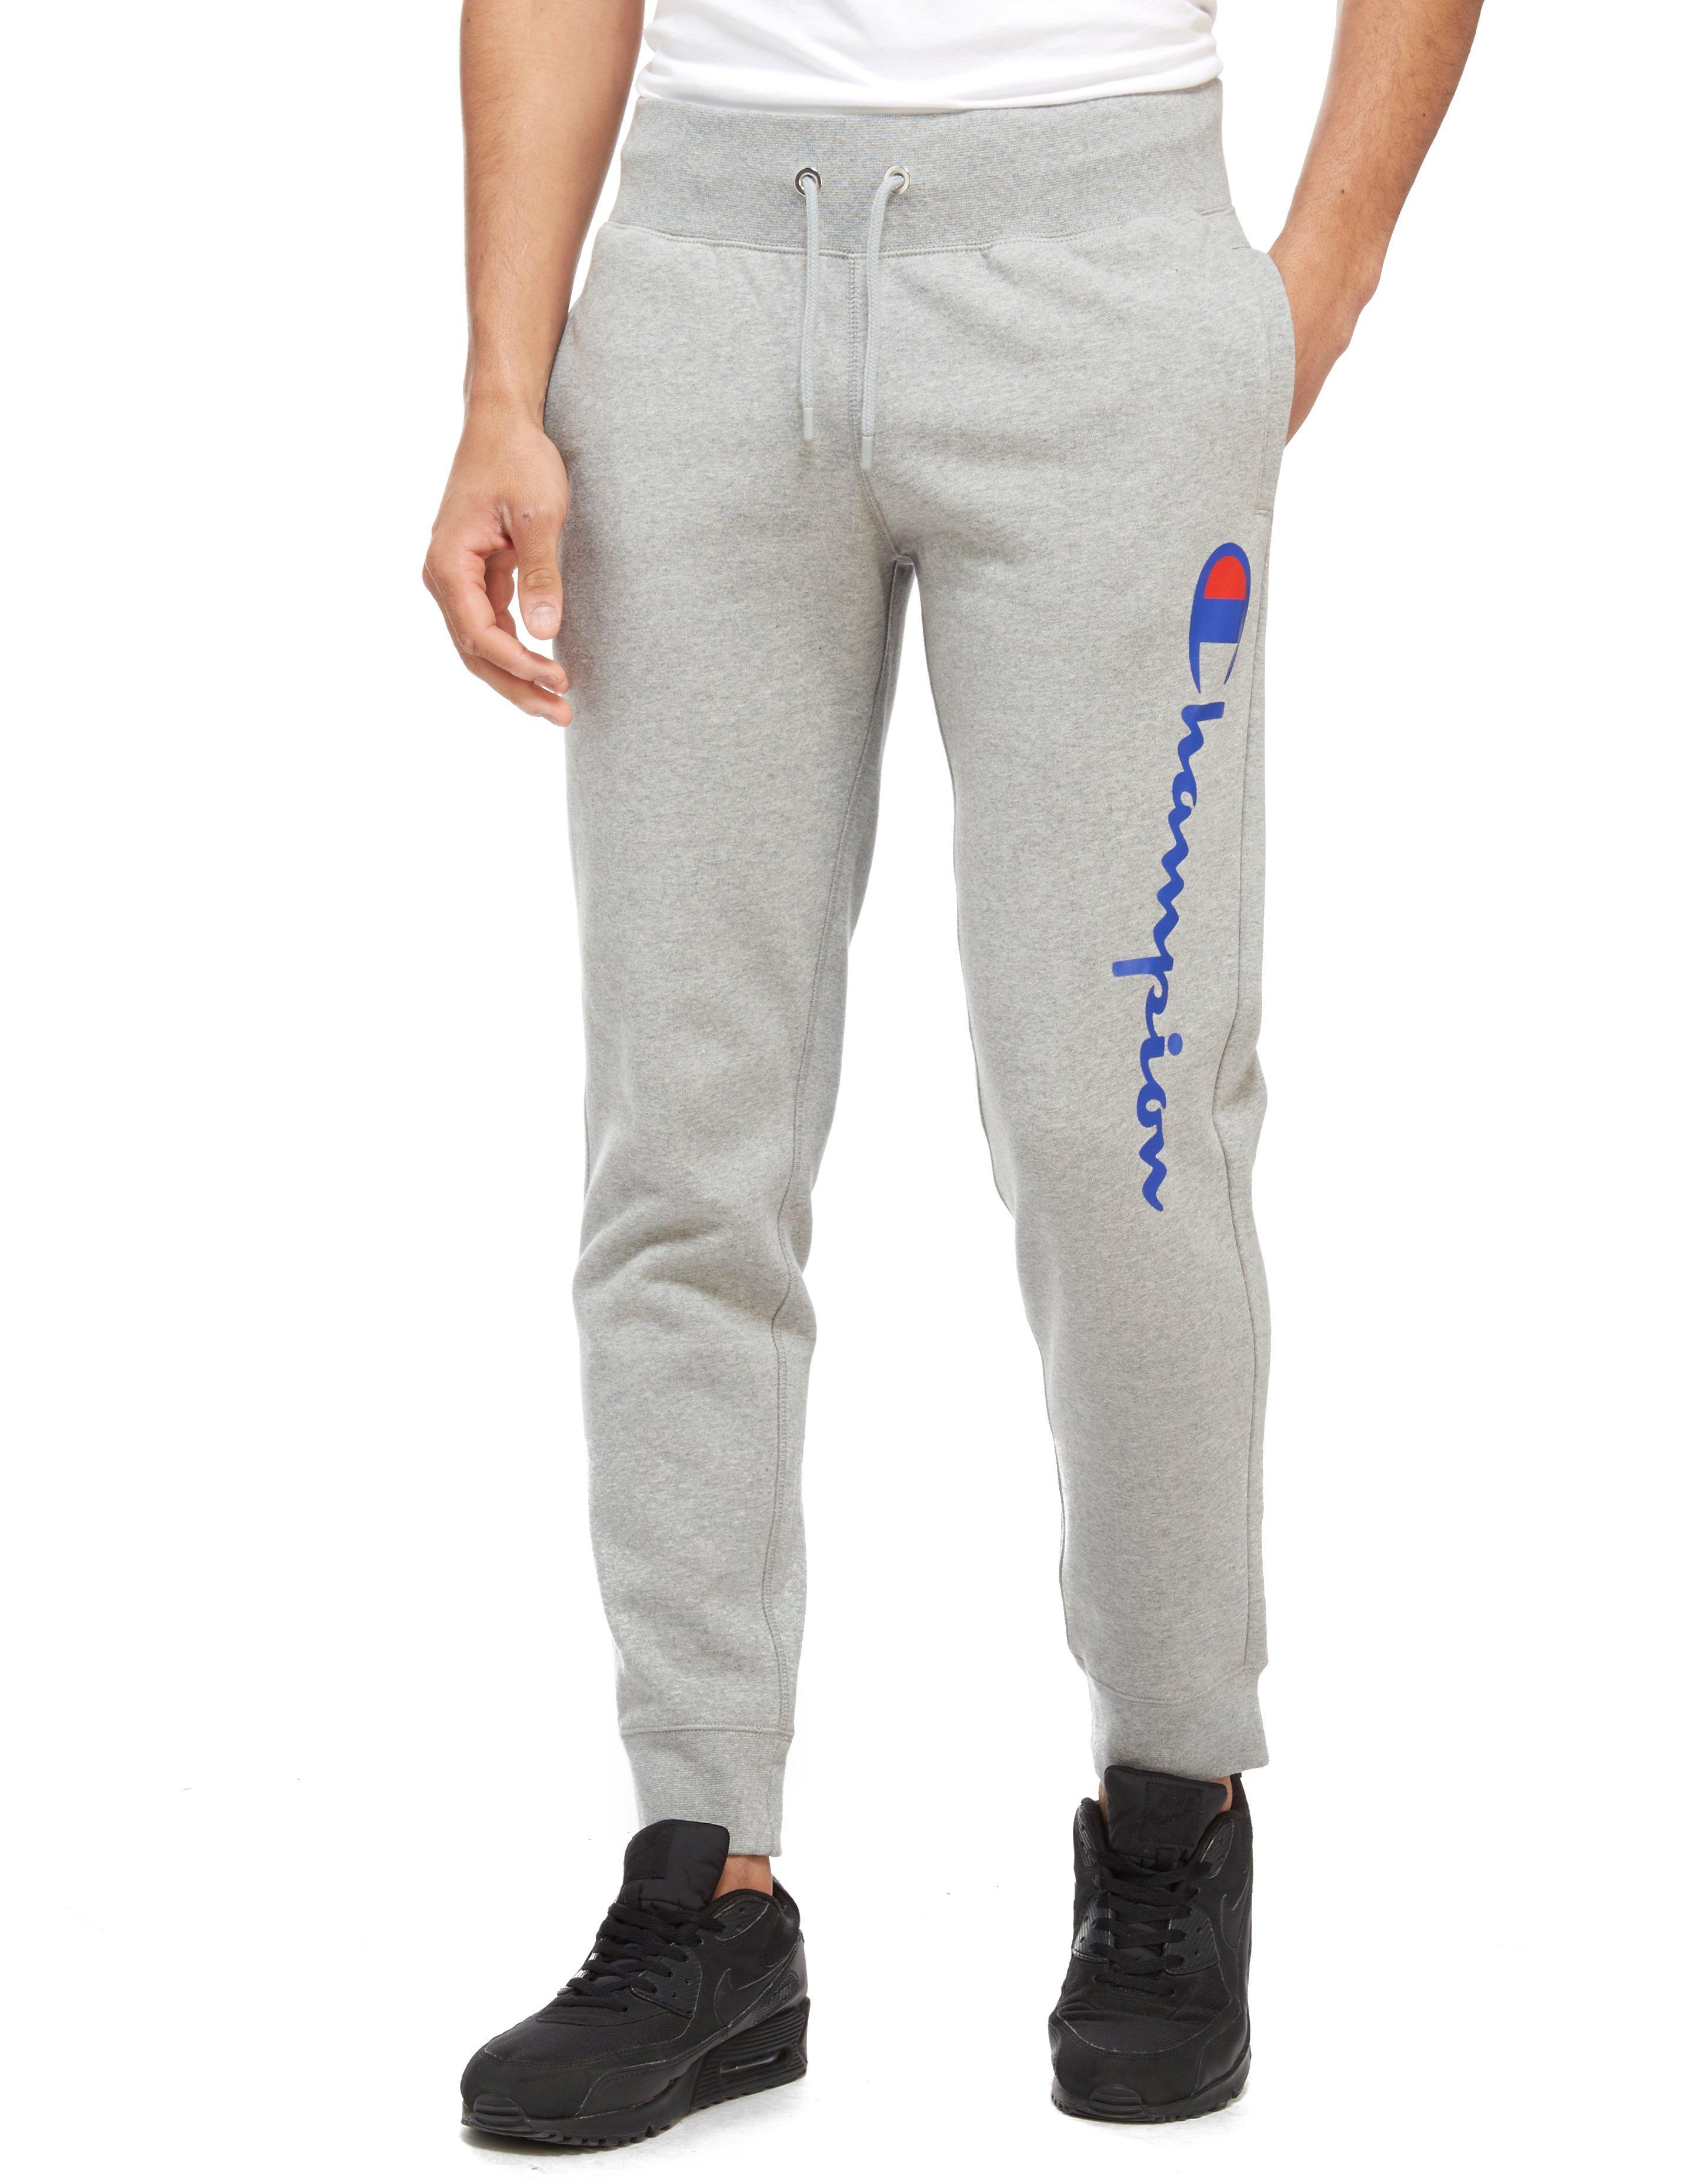 Lyst - Champion Core Joggers in Gray for Men